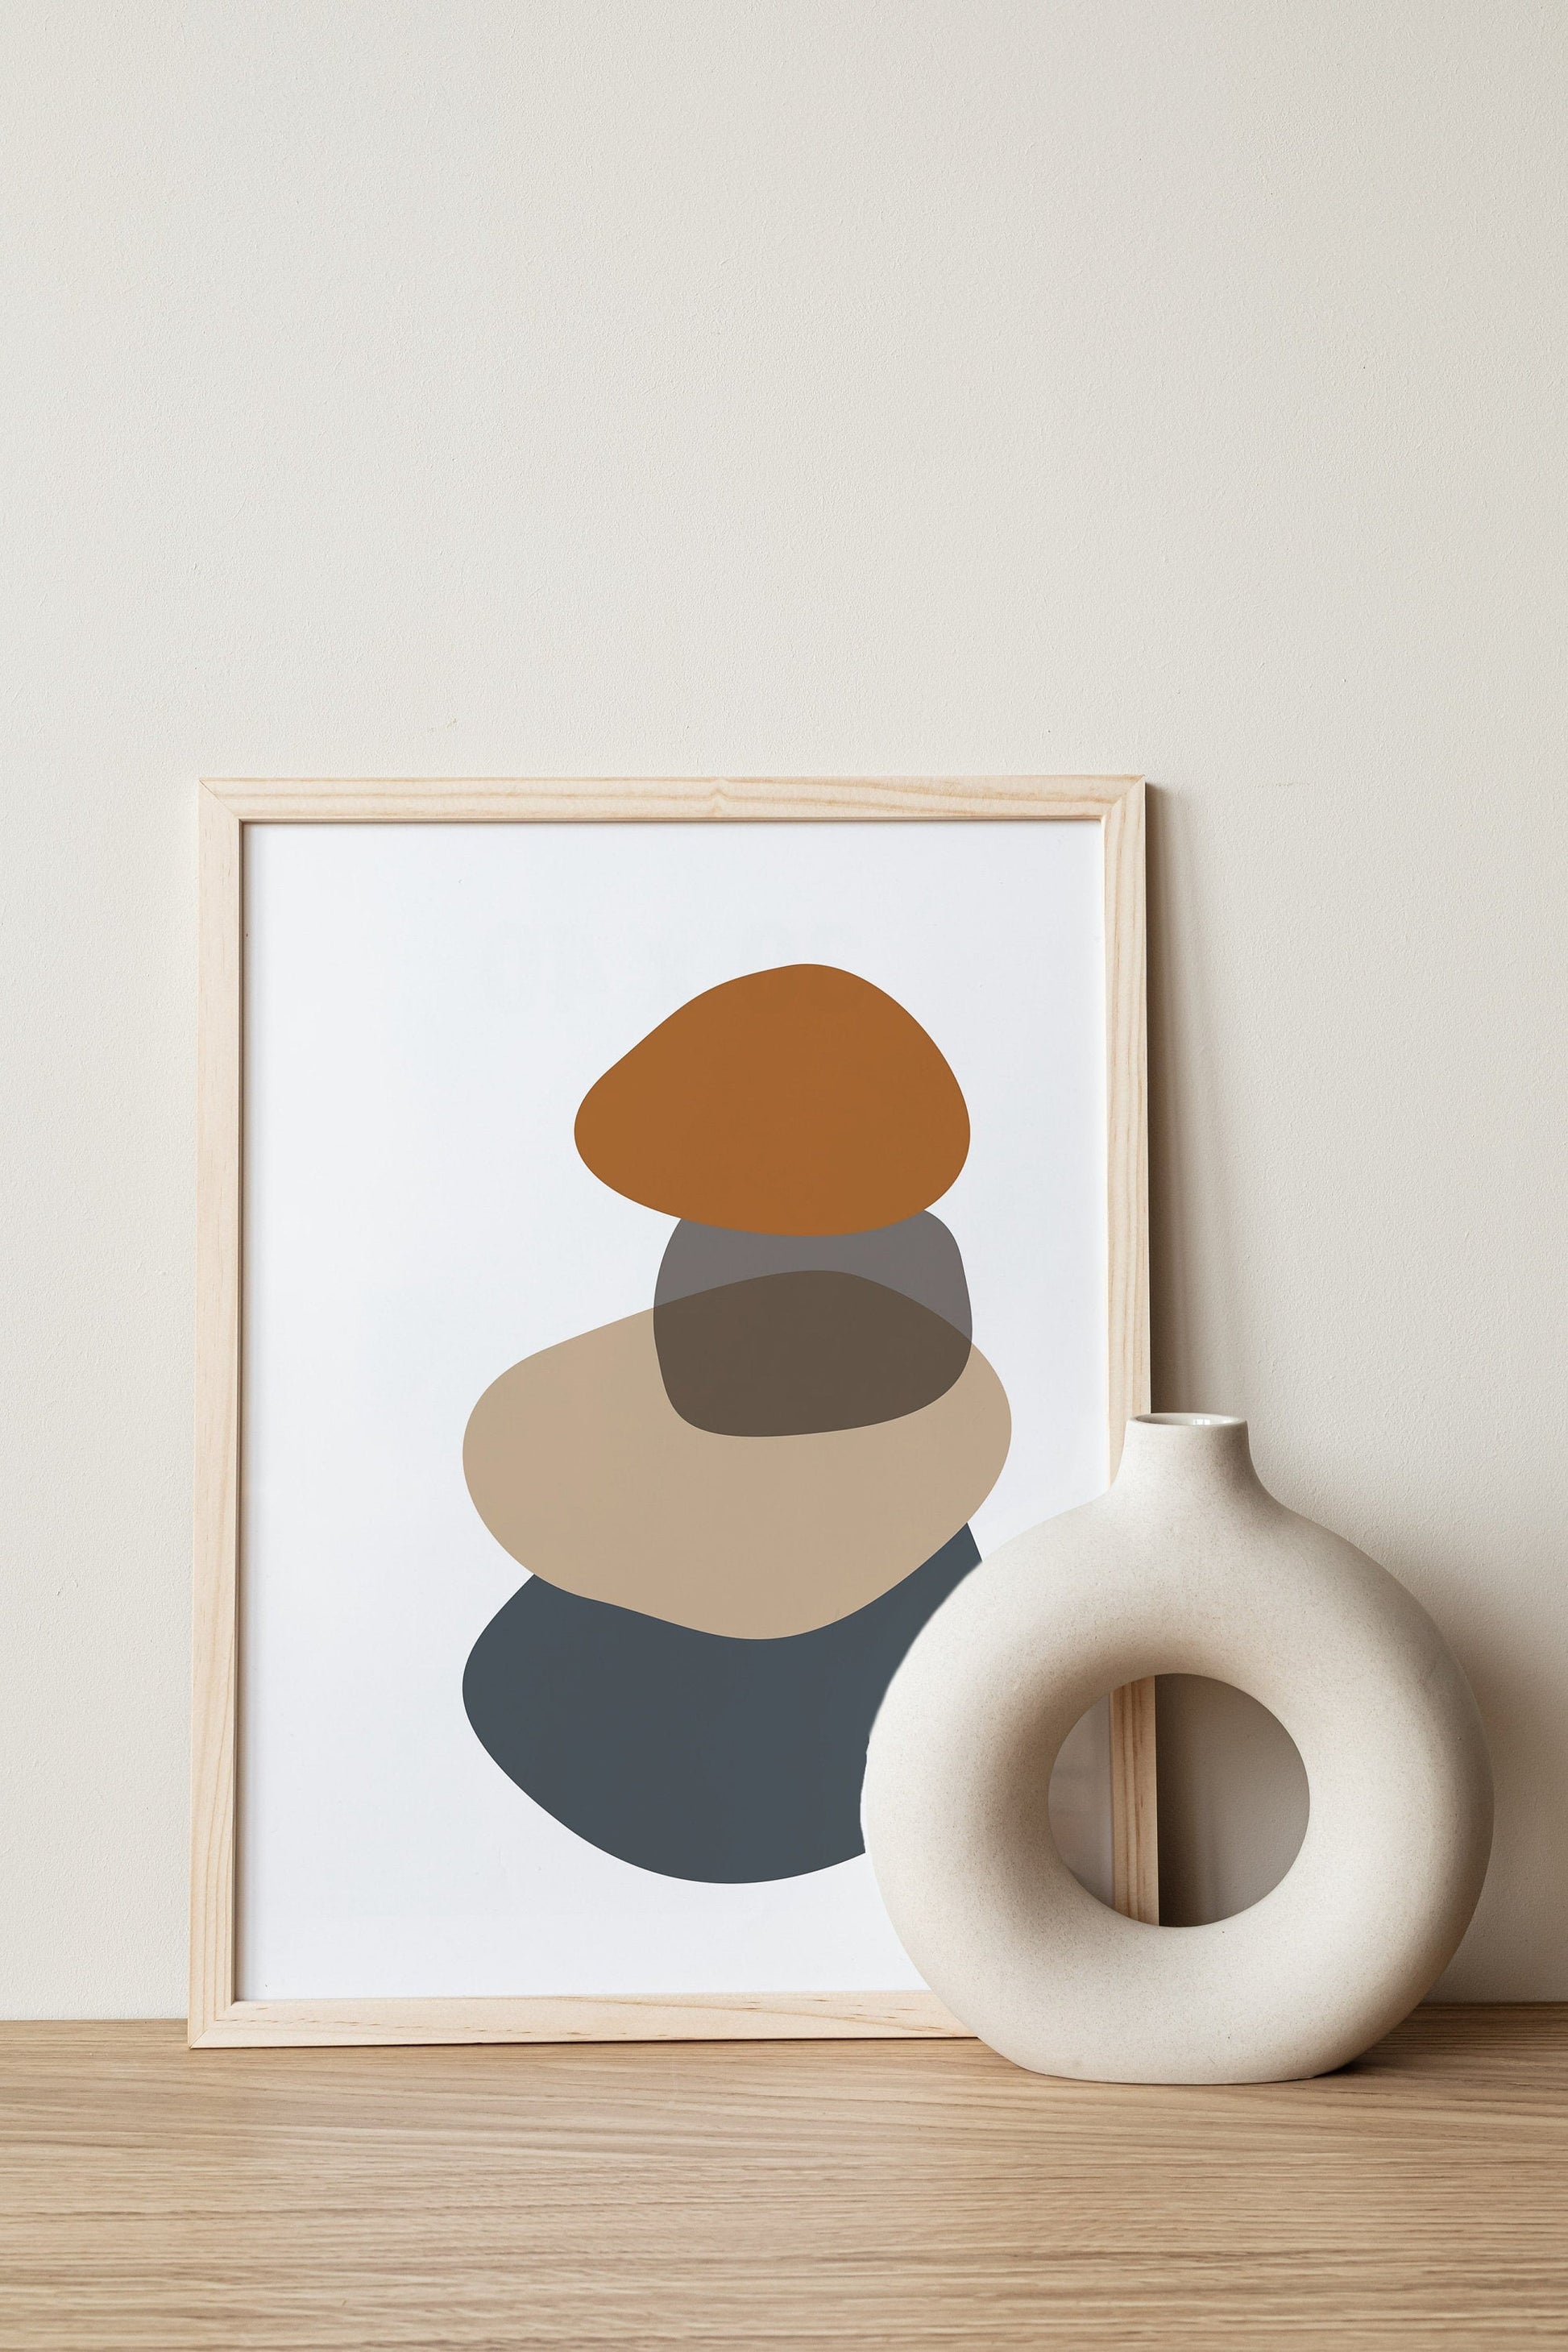 Mid-Century Modern Abstract Wall Art - Oversized Art - Caramel Brown Terracotta Gray Beige - Change Colors Available